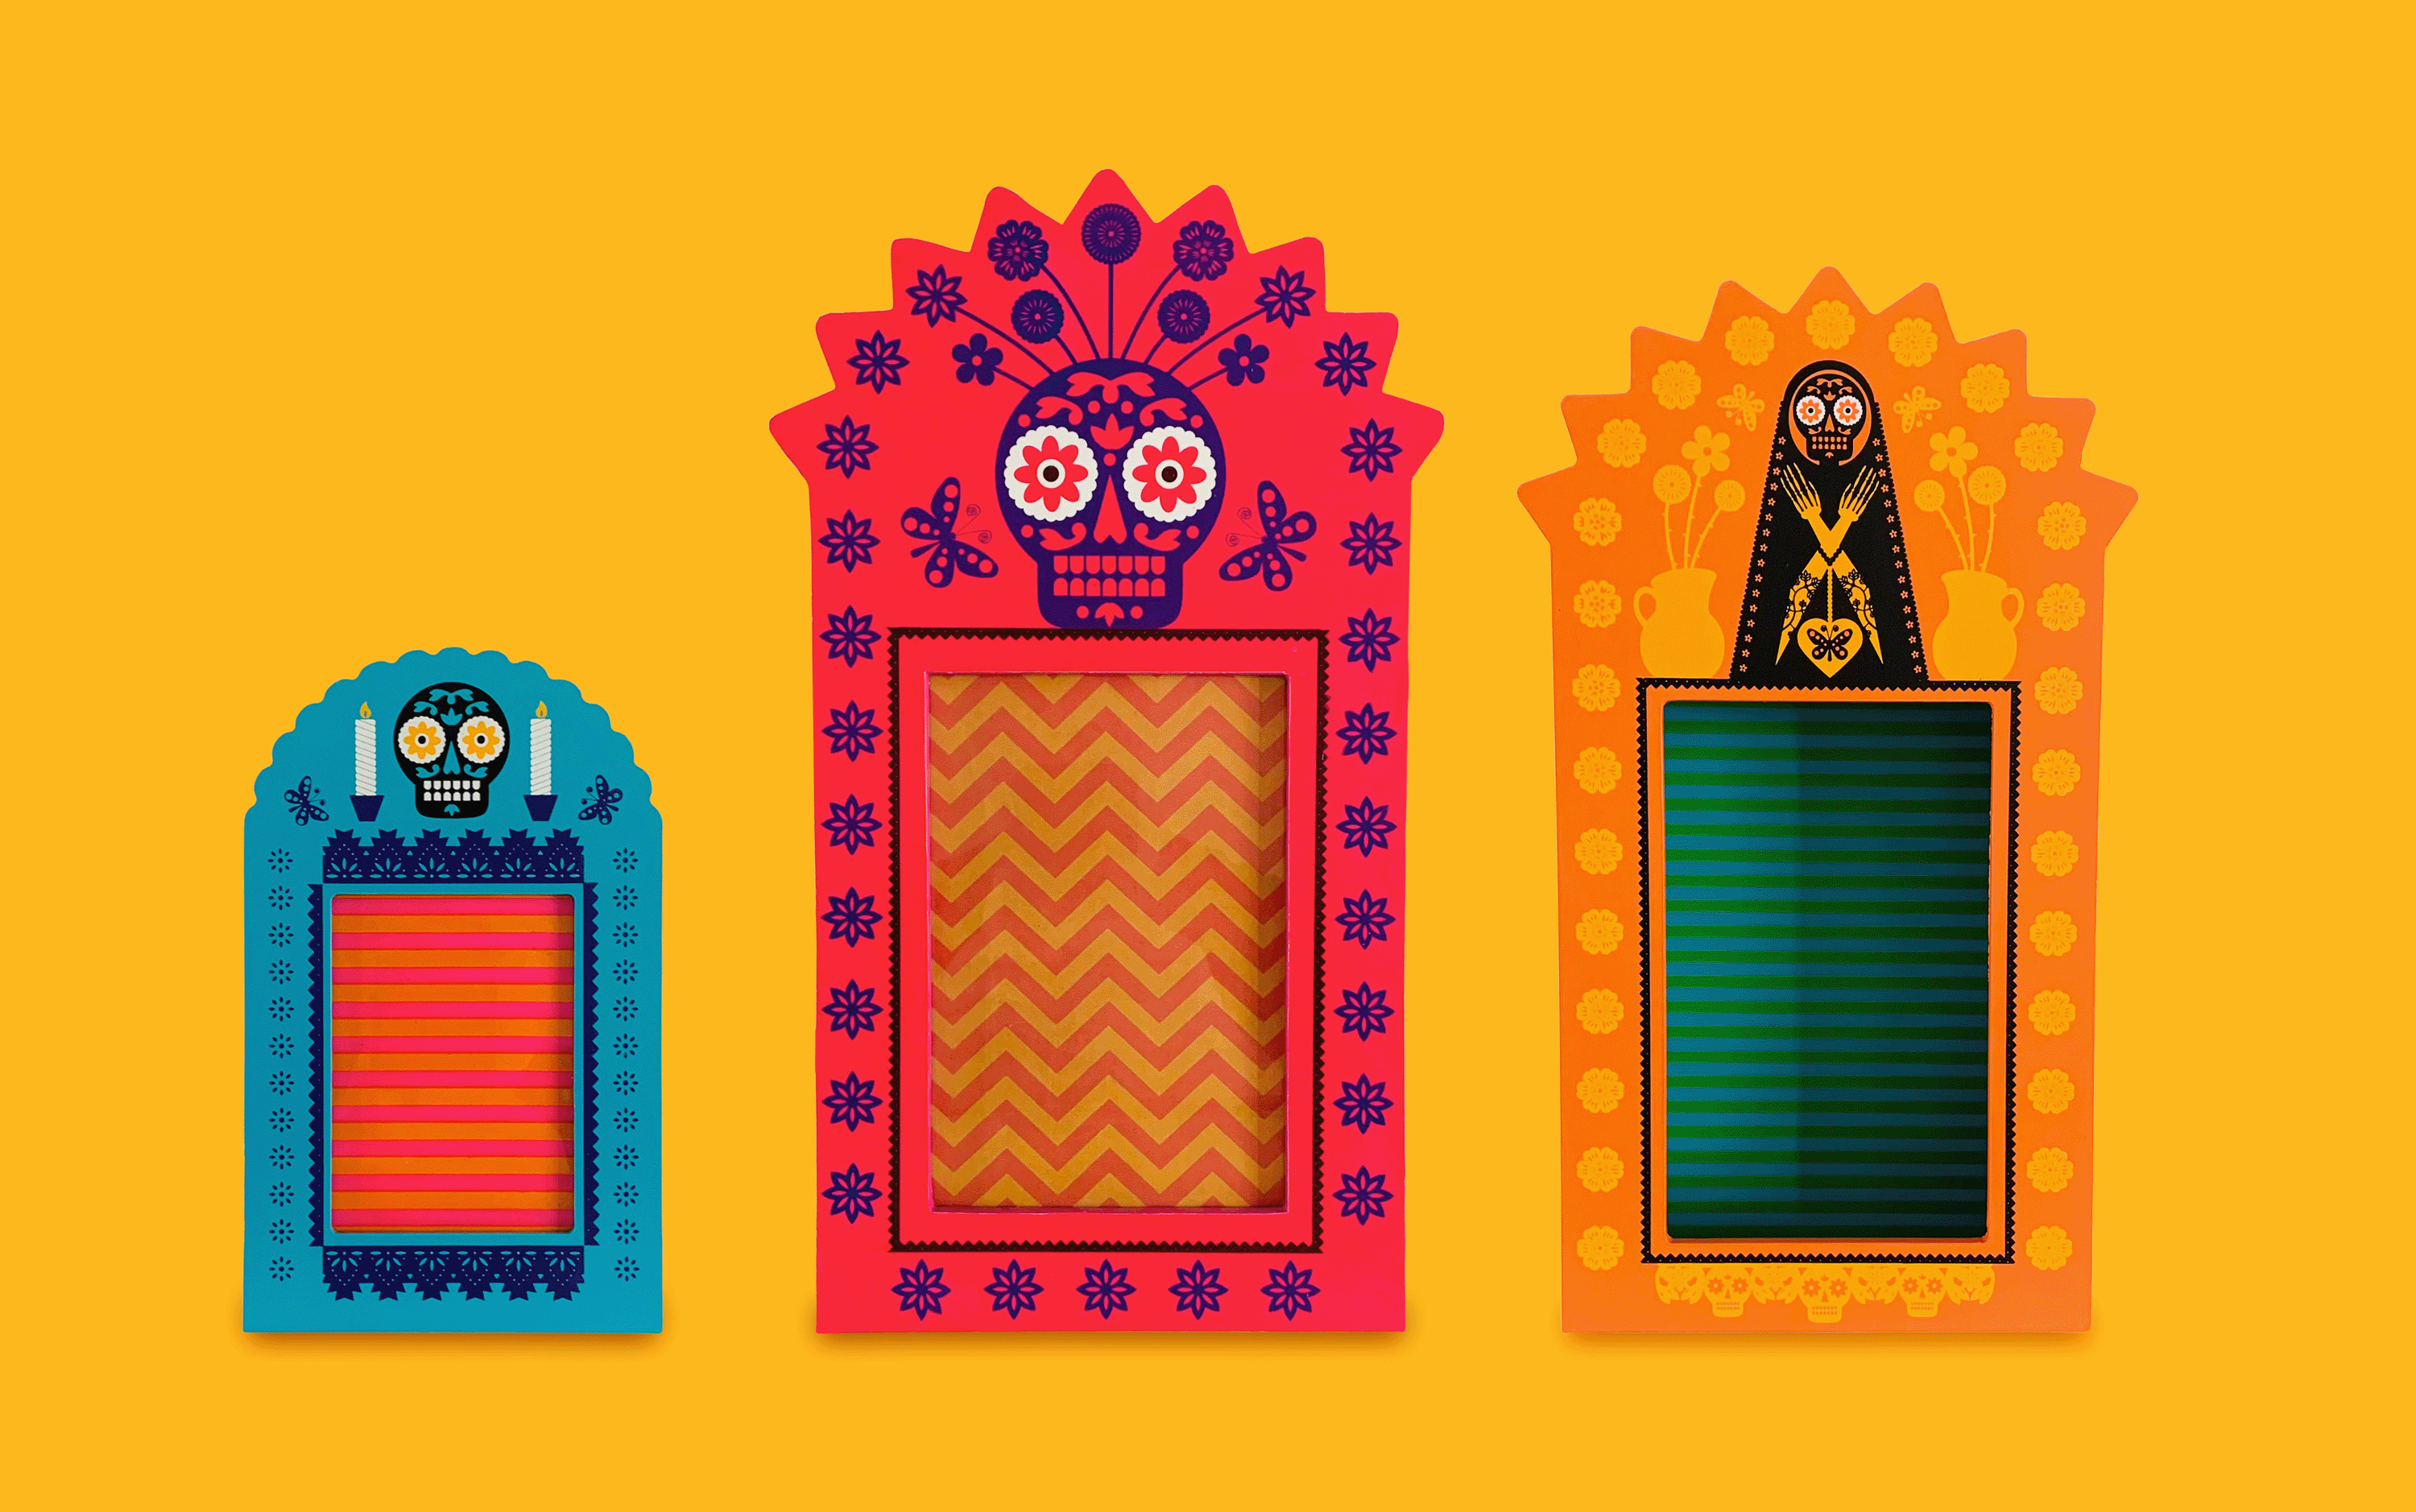 Day of the dead product design for Target stores. Design by Luis Fitch from UNO Branding.